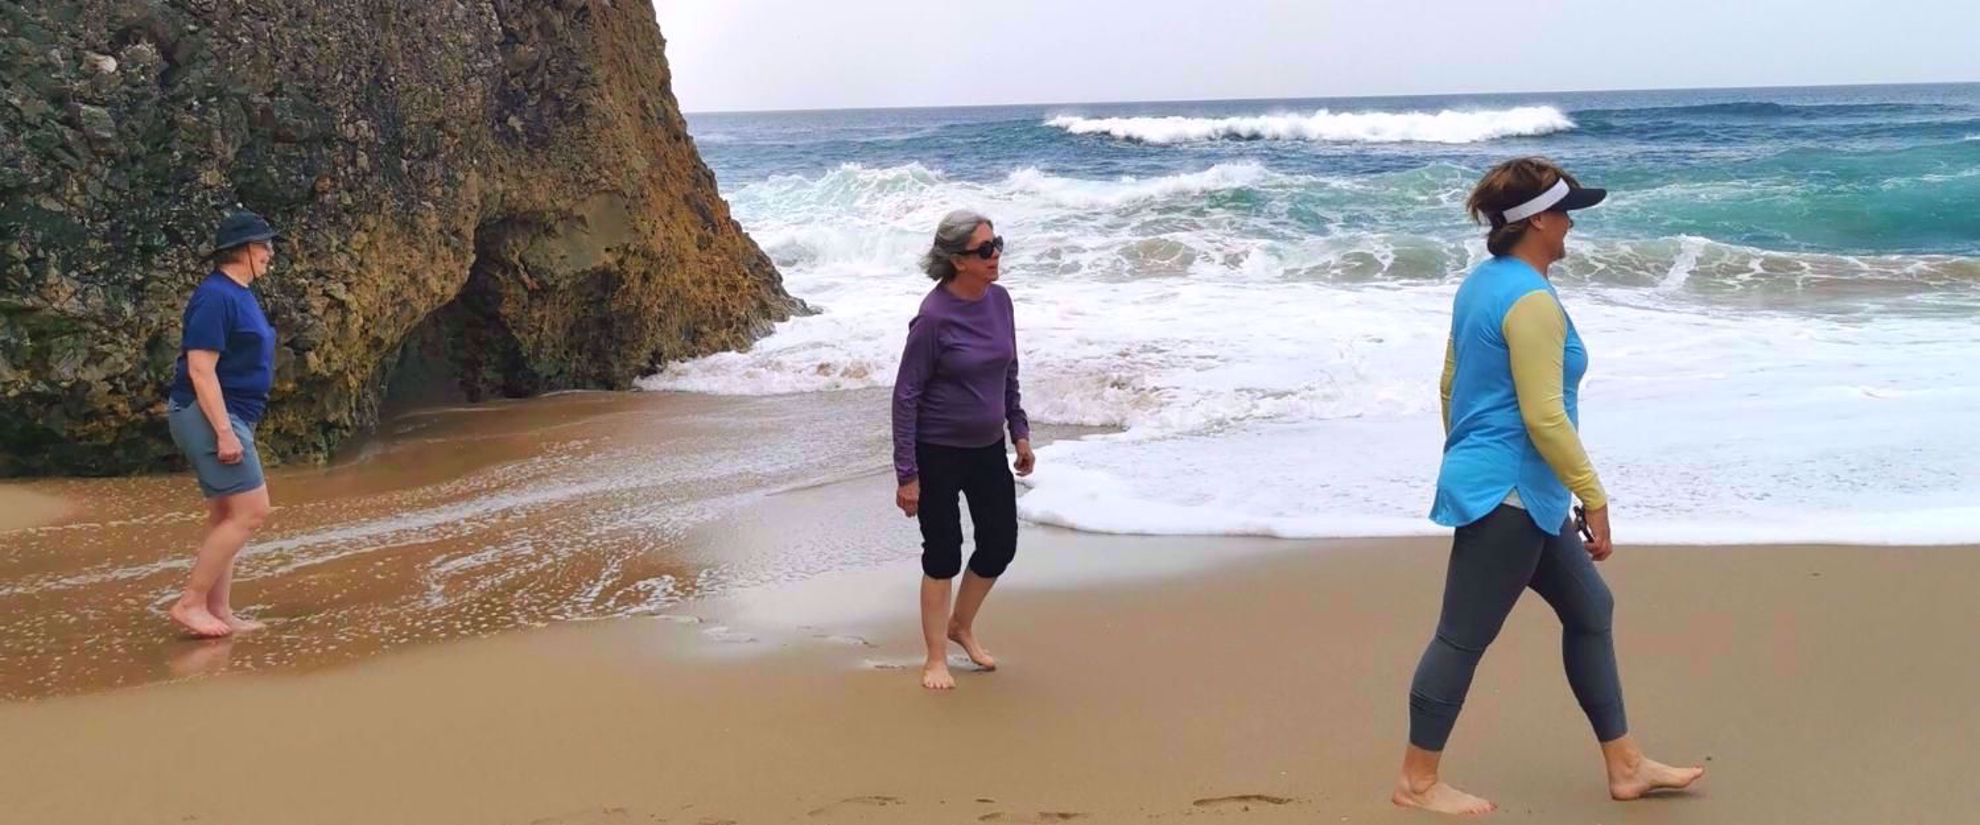 barefoot walking along the beach in portugal